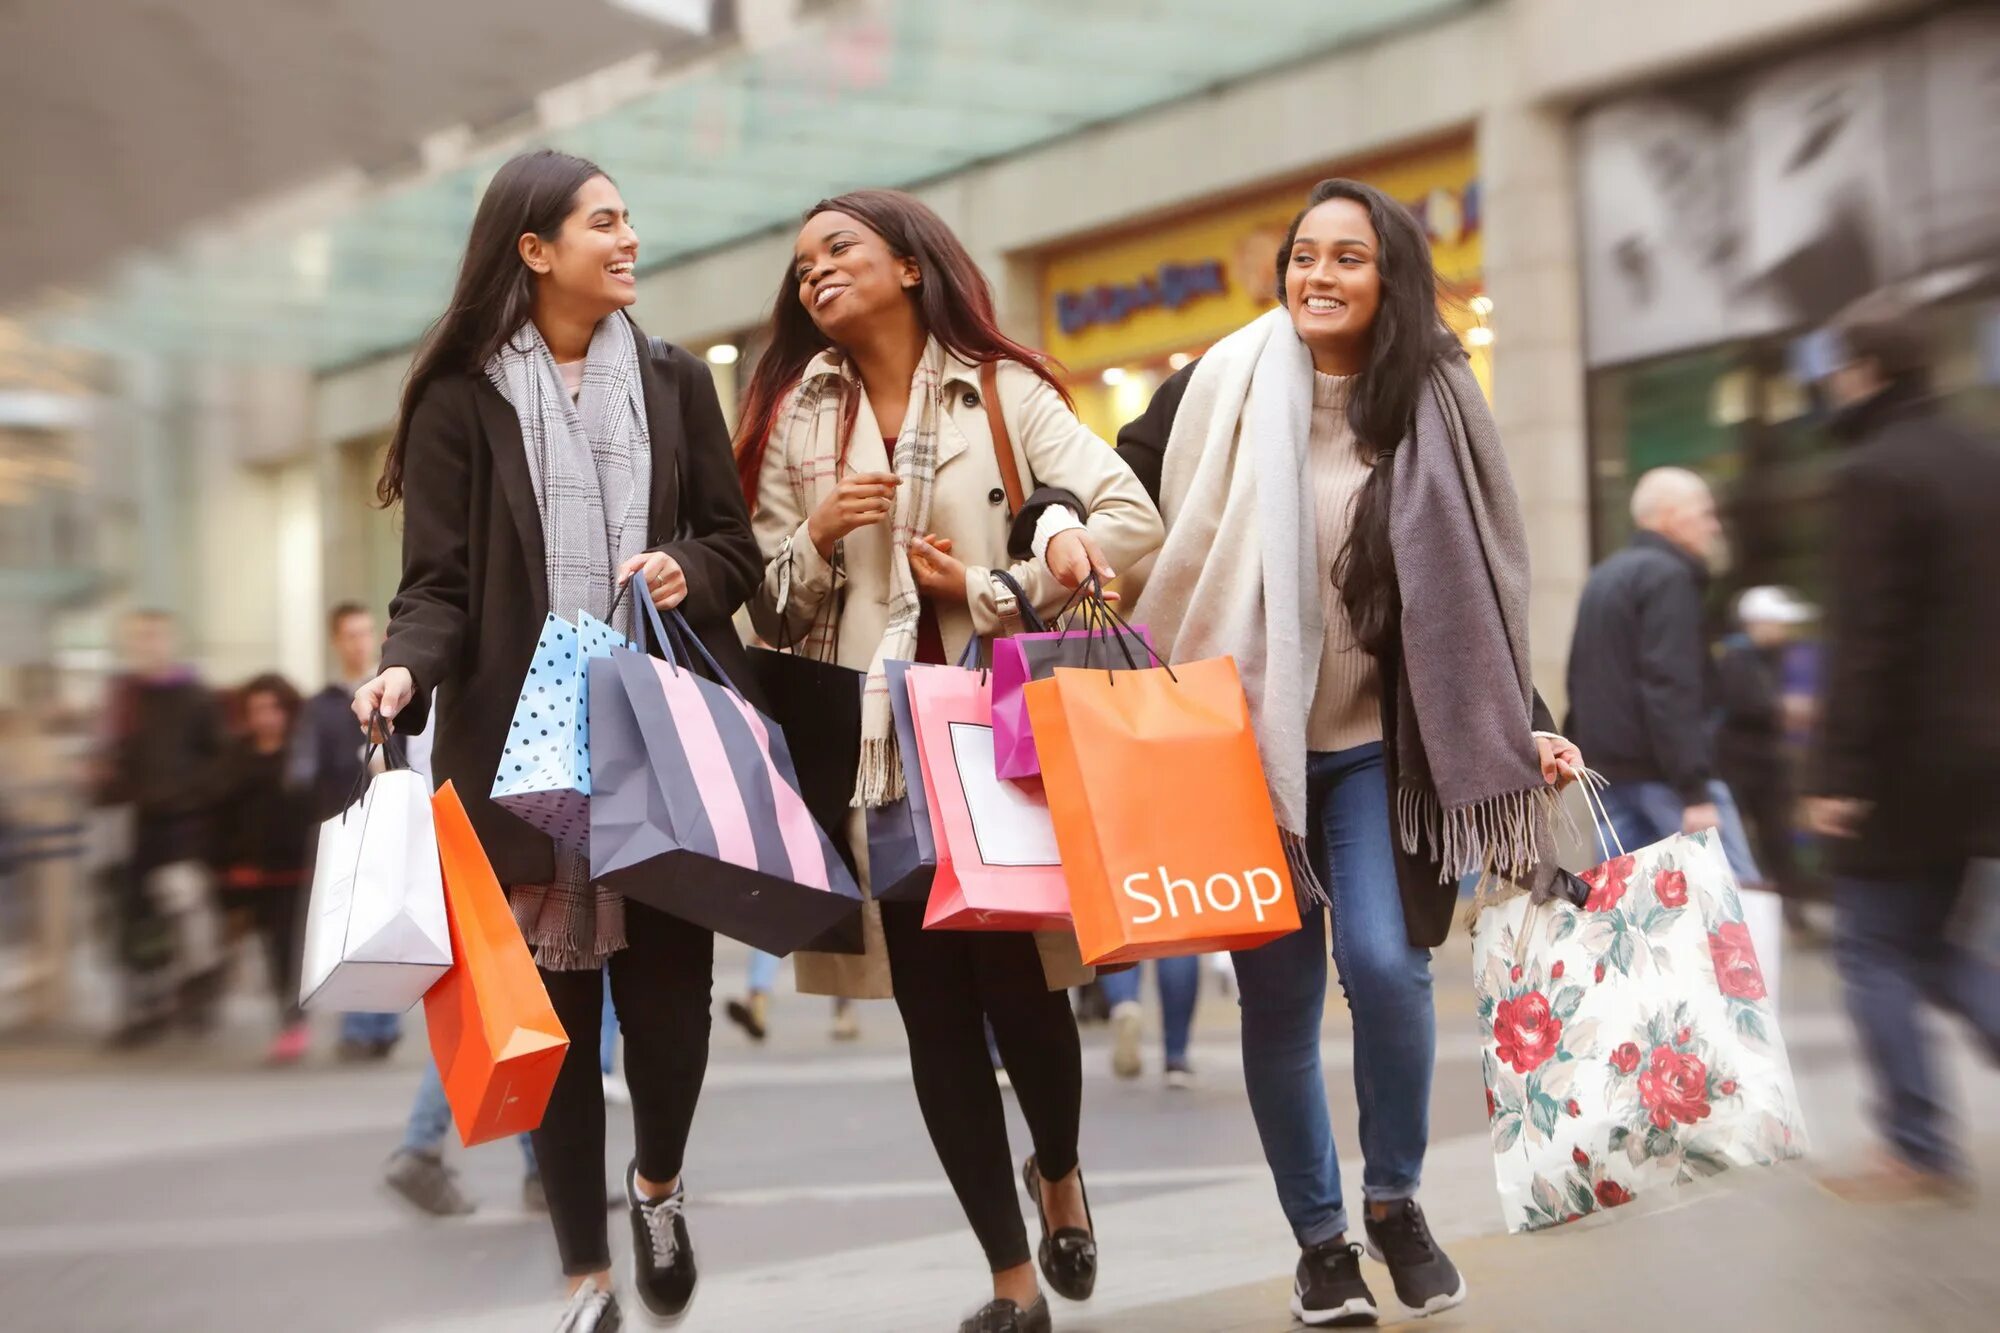 1- She’ll go shopping in Town …. Consumer confidence. We go shopping today